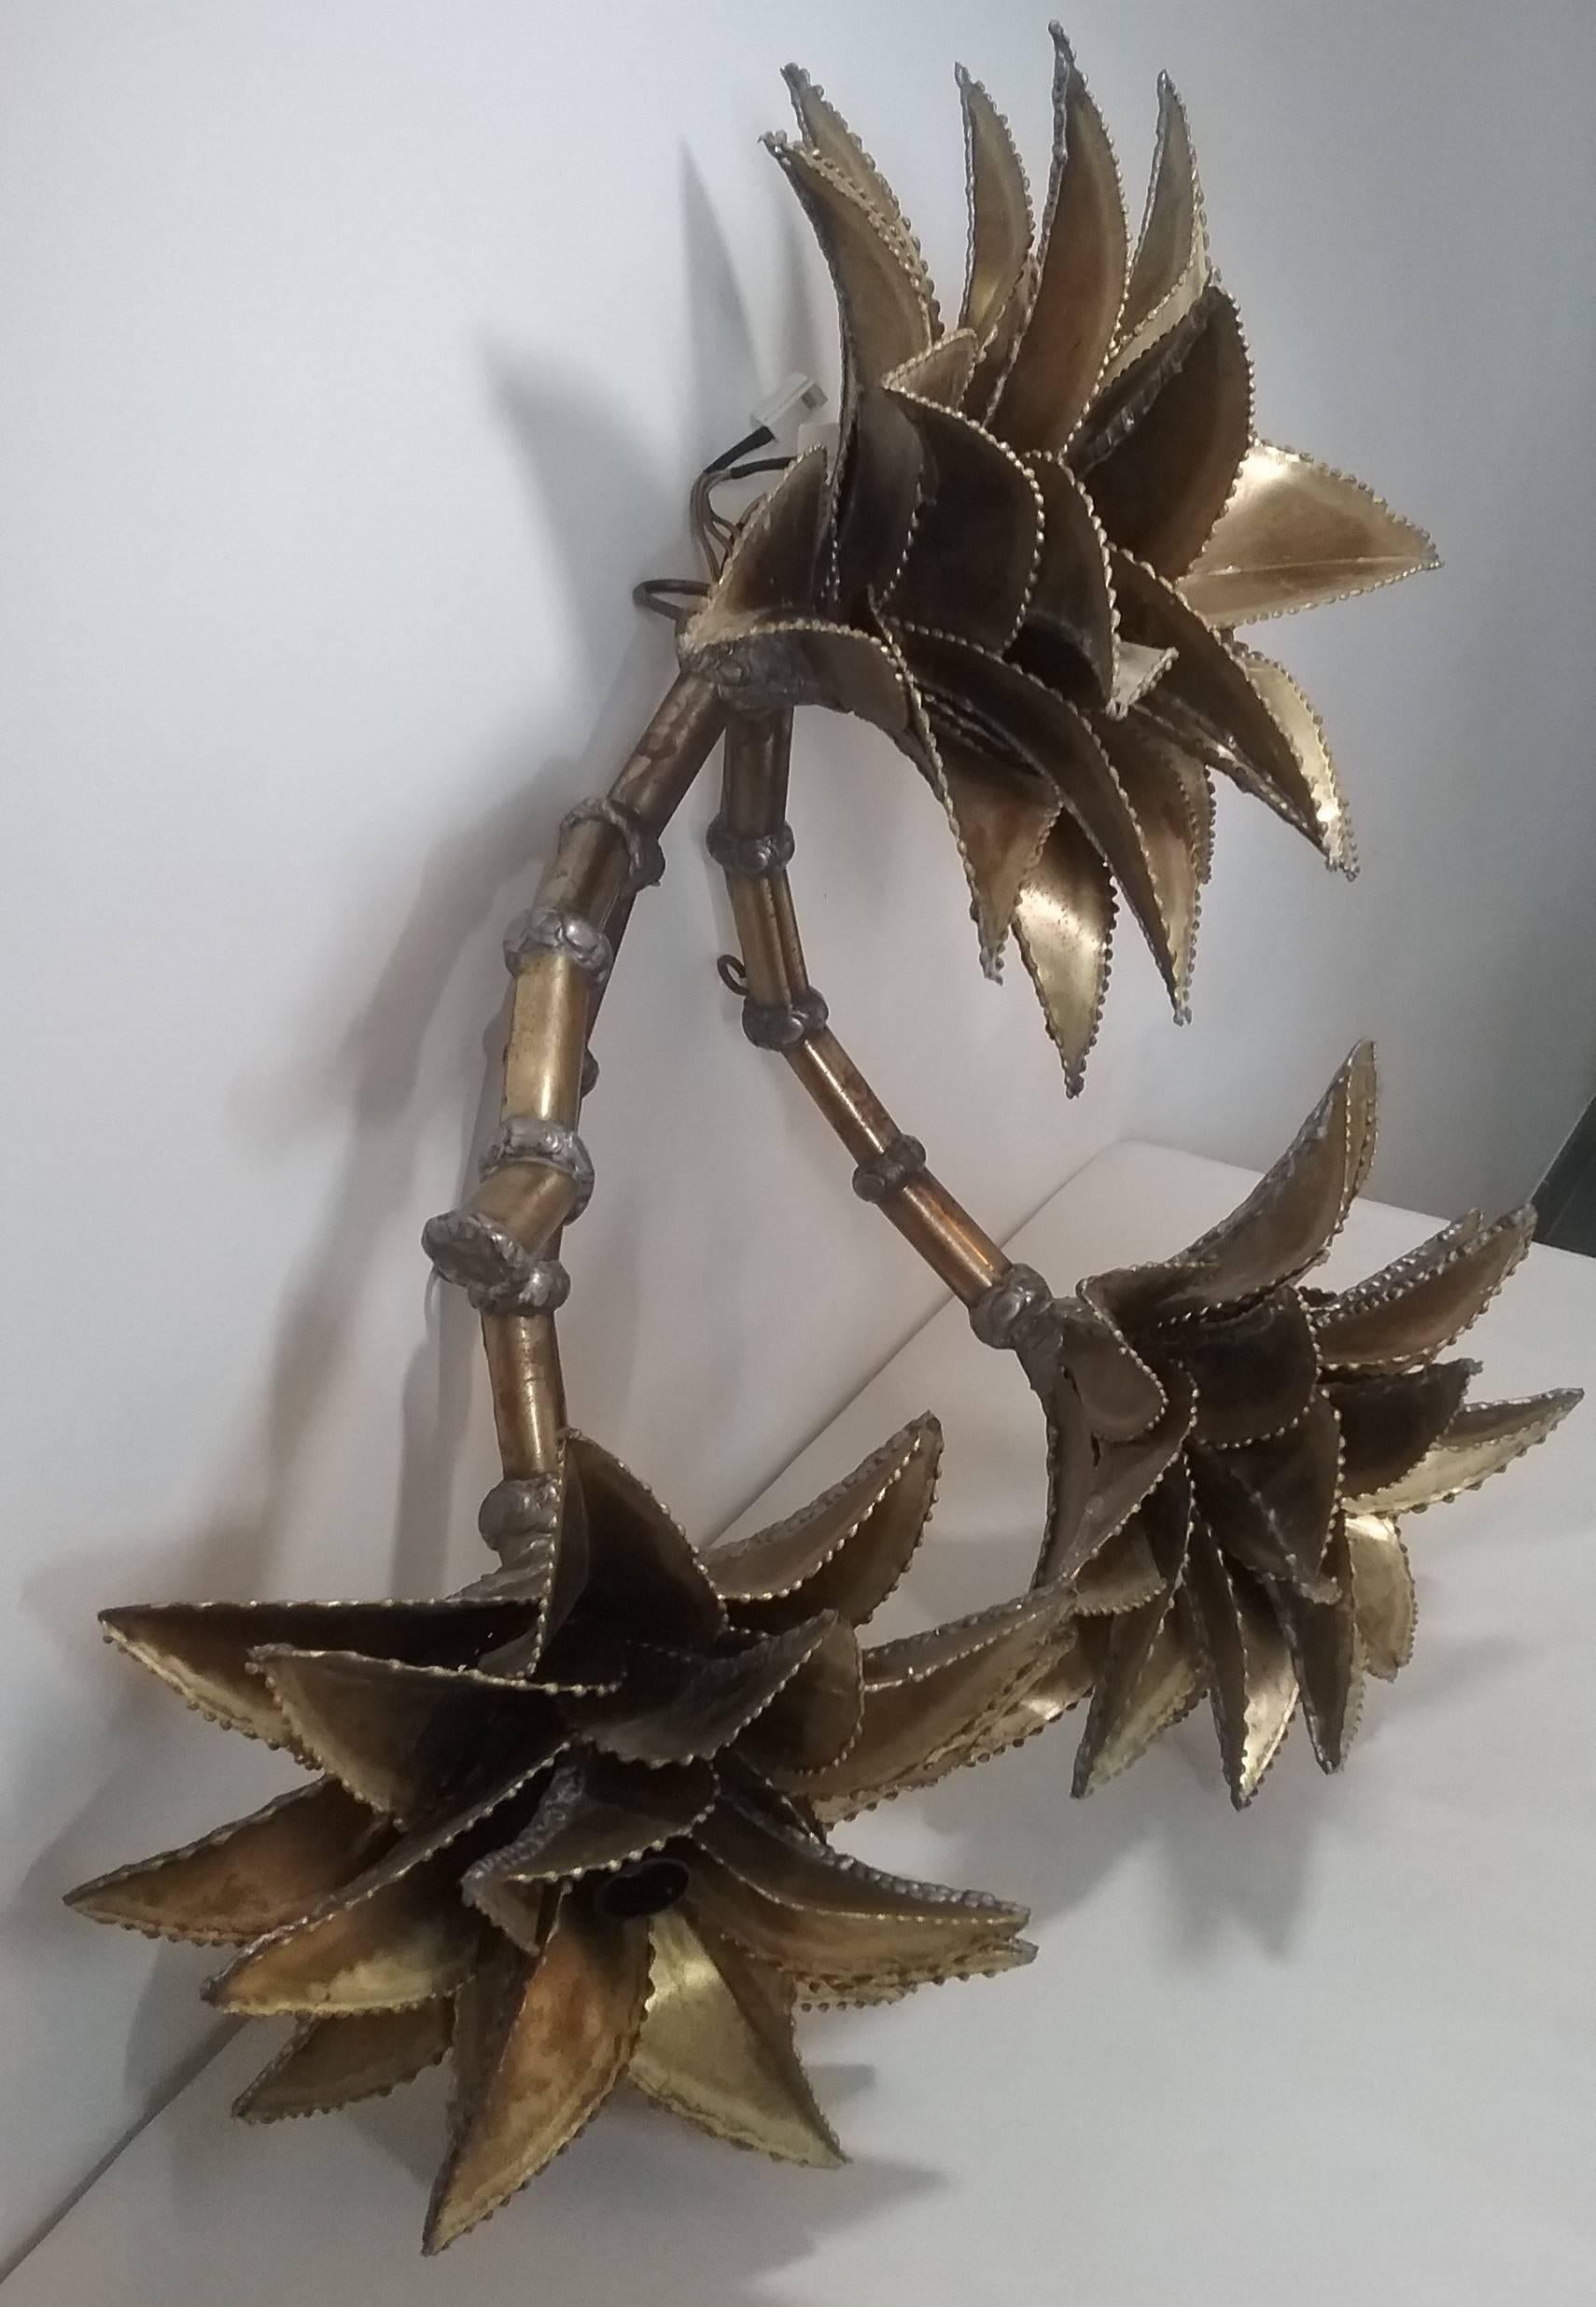 Large palm tree wall lamp with three brass stems with a light on the top of each, designed by Maison Jansen.
It's not a re-edition, it's a 1960s authentic French craftwork
Look at the quality of the leaves and the tin solder.
All the brass leaves